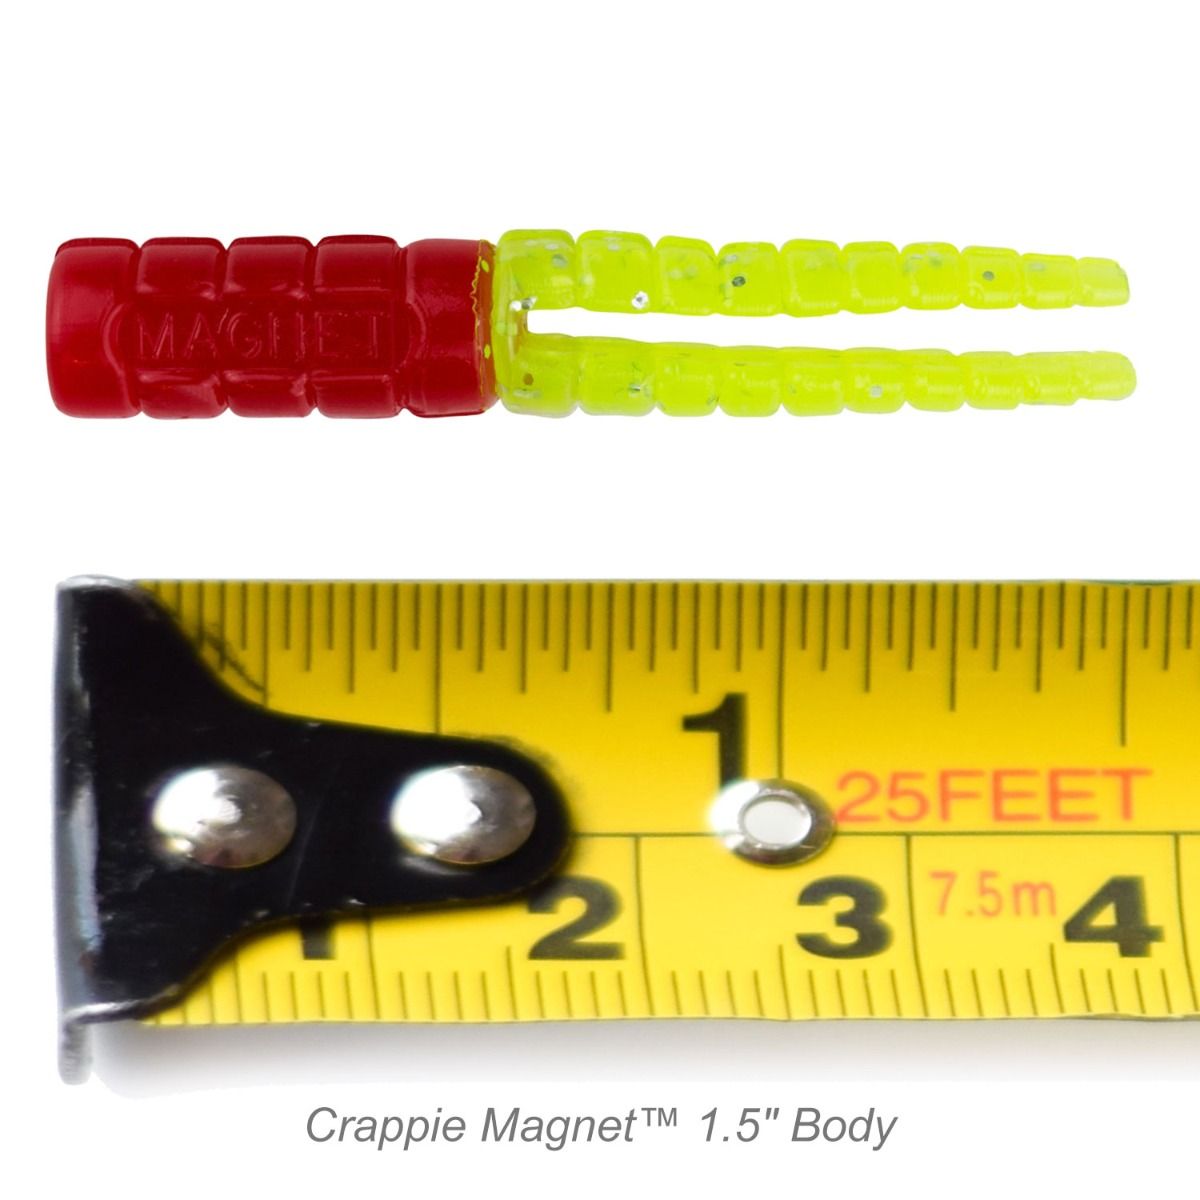 Crappie Magnet 15pc. Body Packs